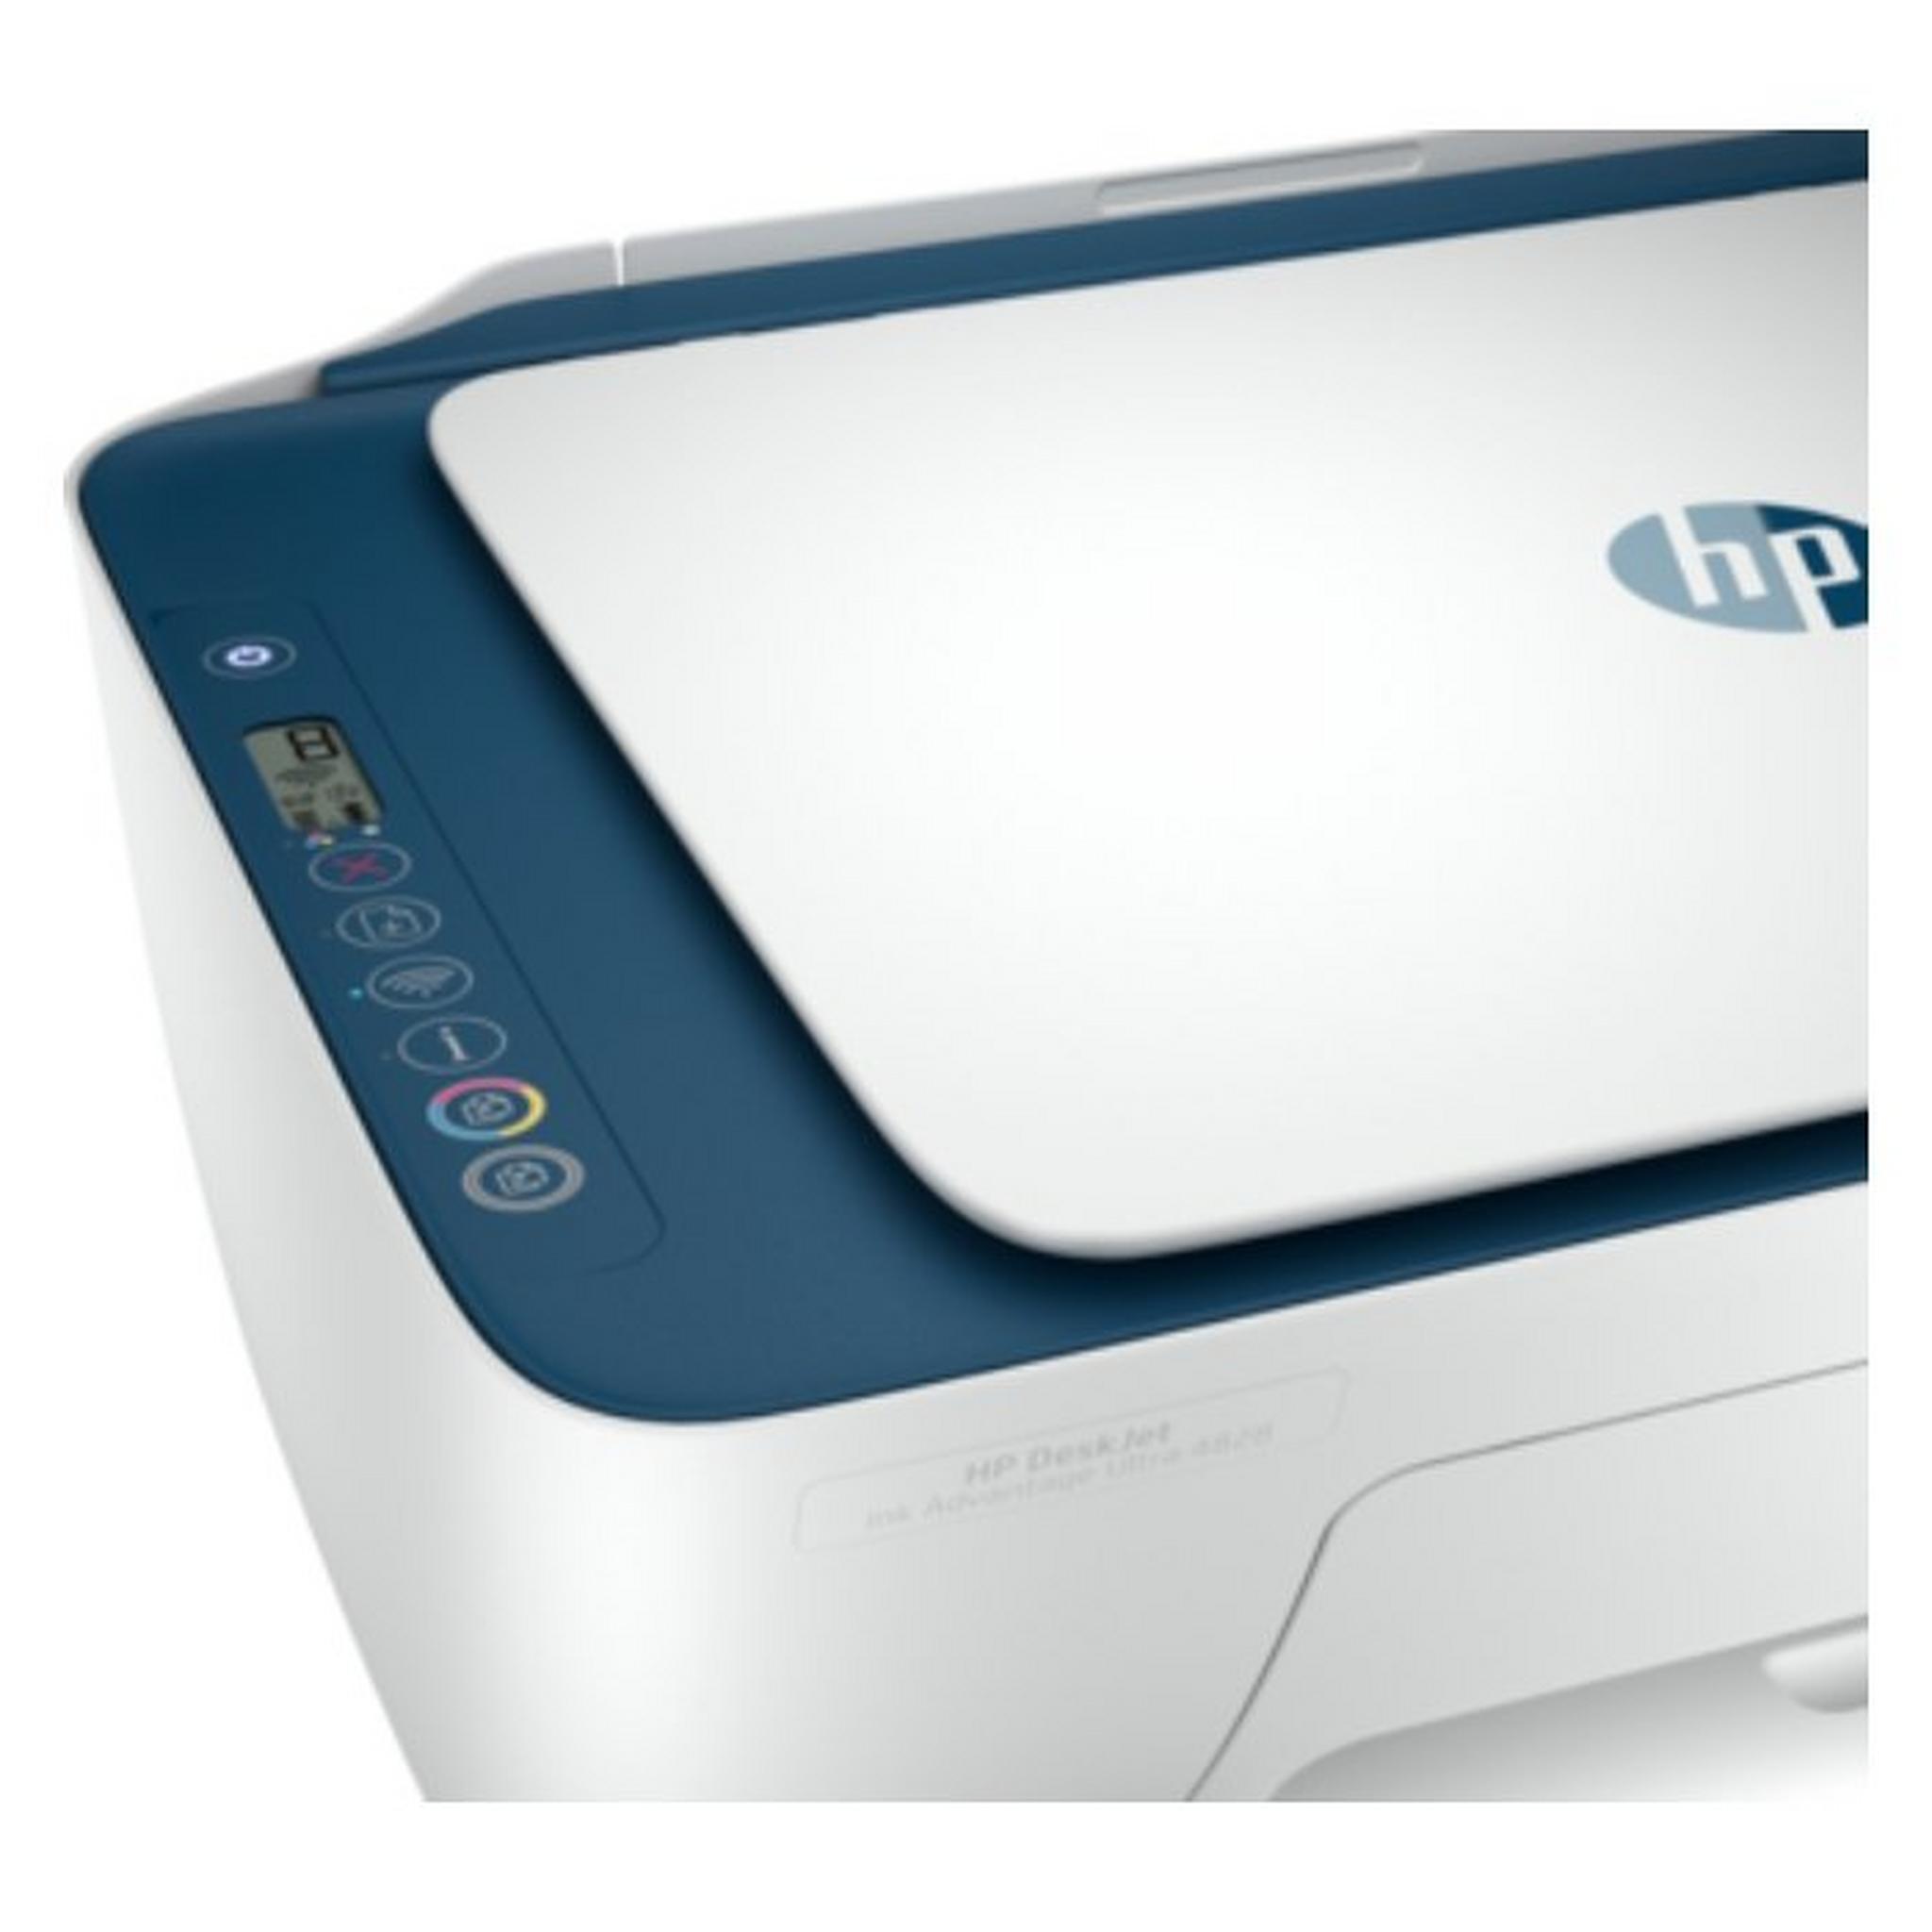 HP InkJet 4828 All-in-One Printer (25R76A)